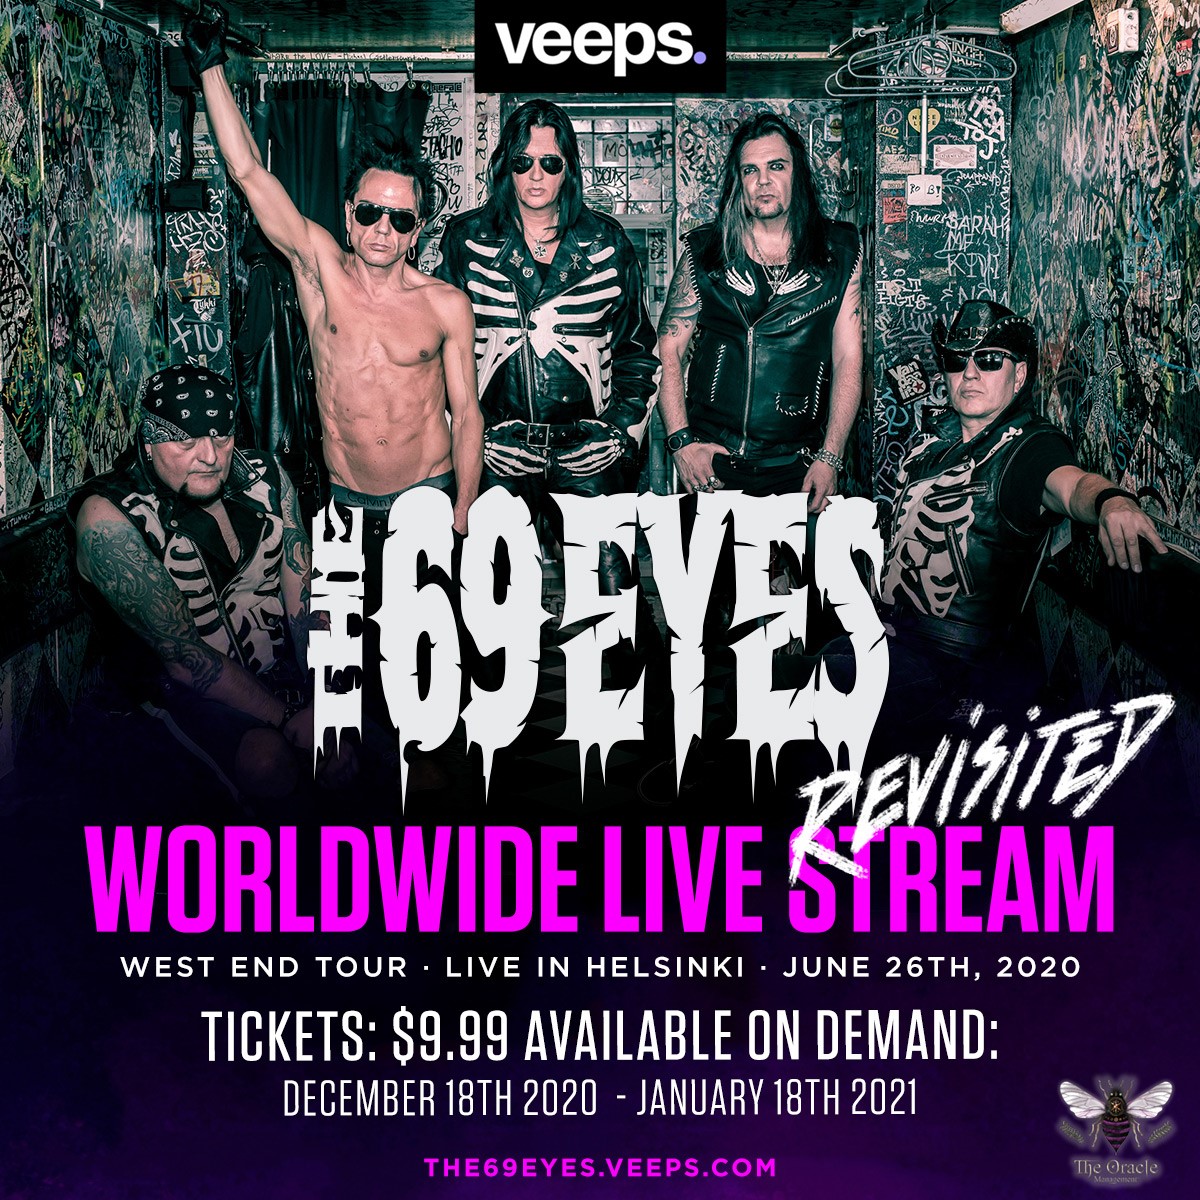 The 69 Eyes: disponibile il "Worldwide Live Stream Revisited"